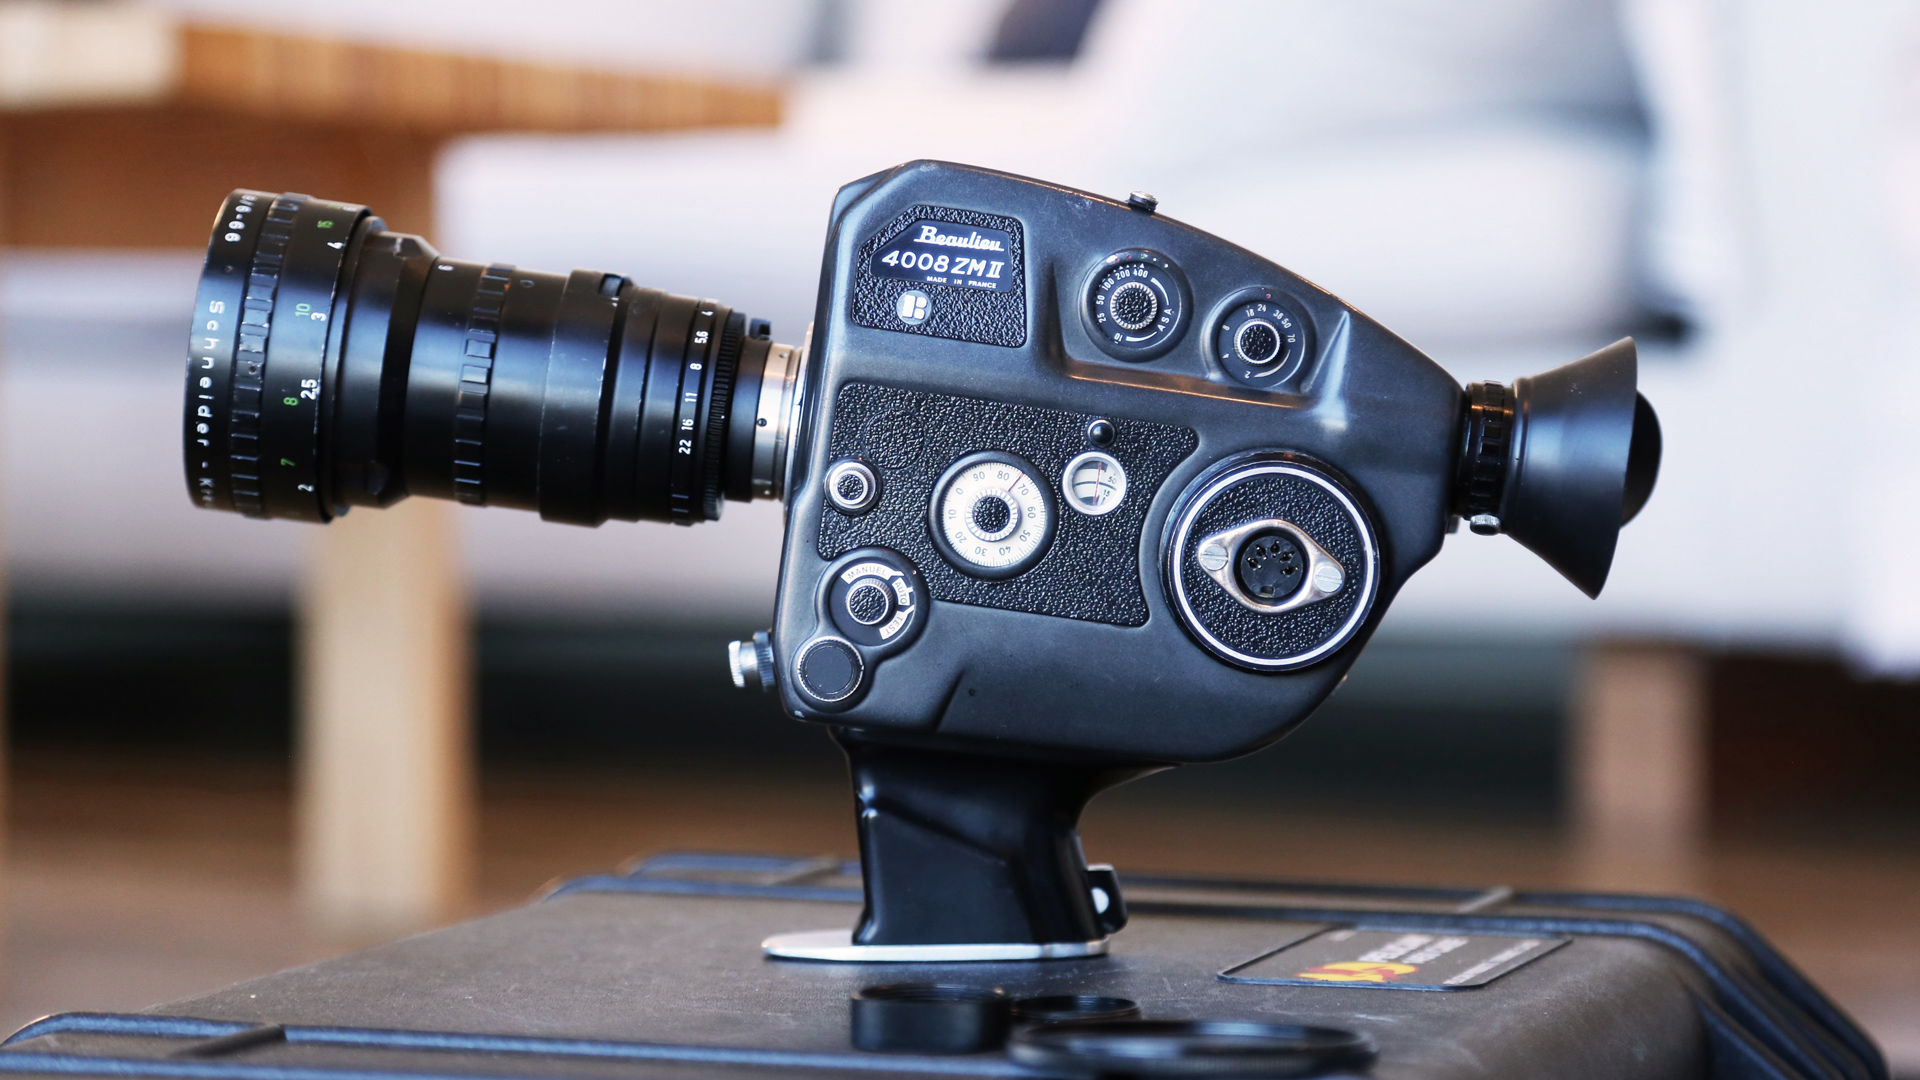 What You Need to Know Before Buying a Super 8 Camera » Shoot It